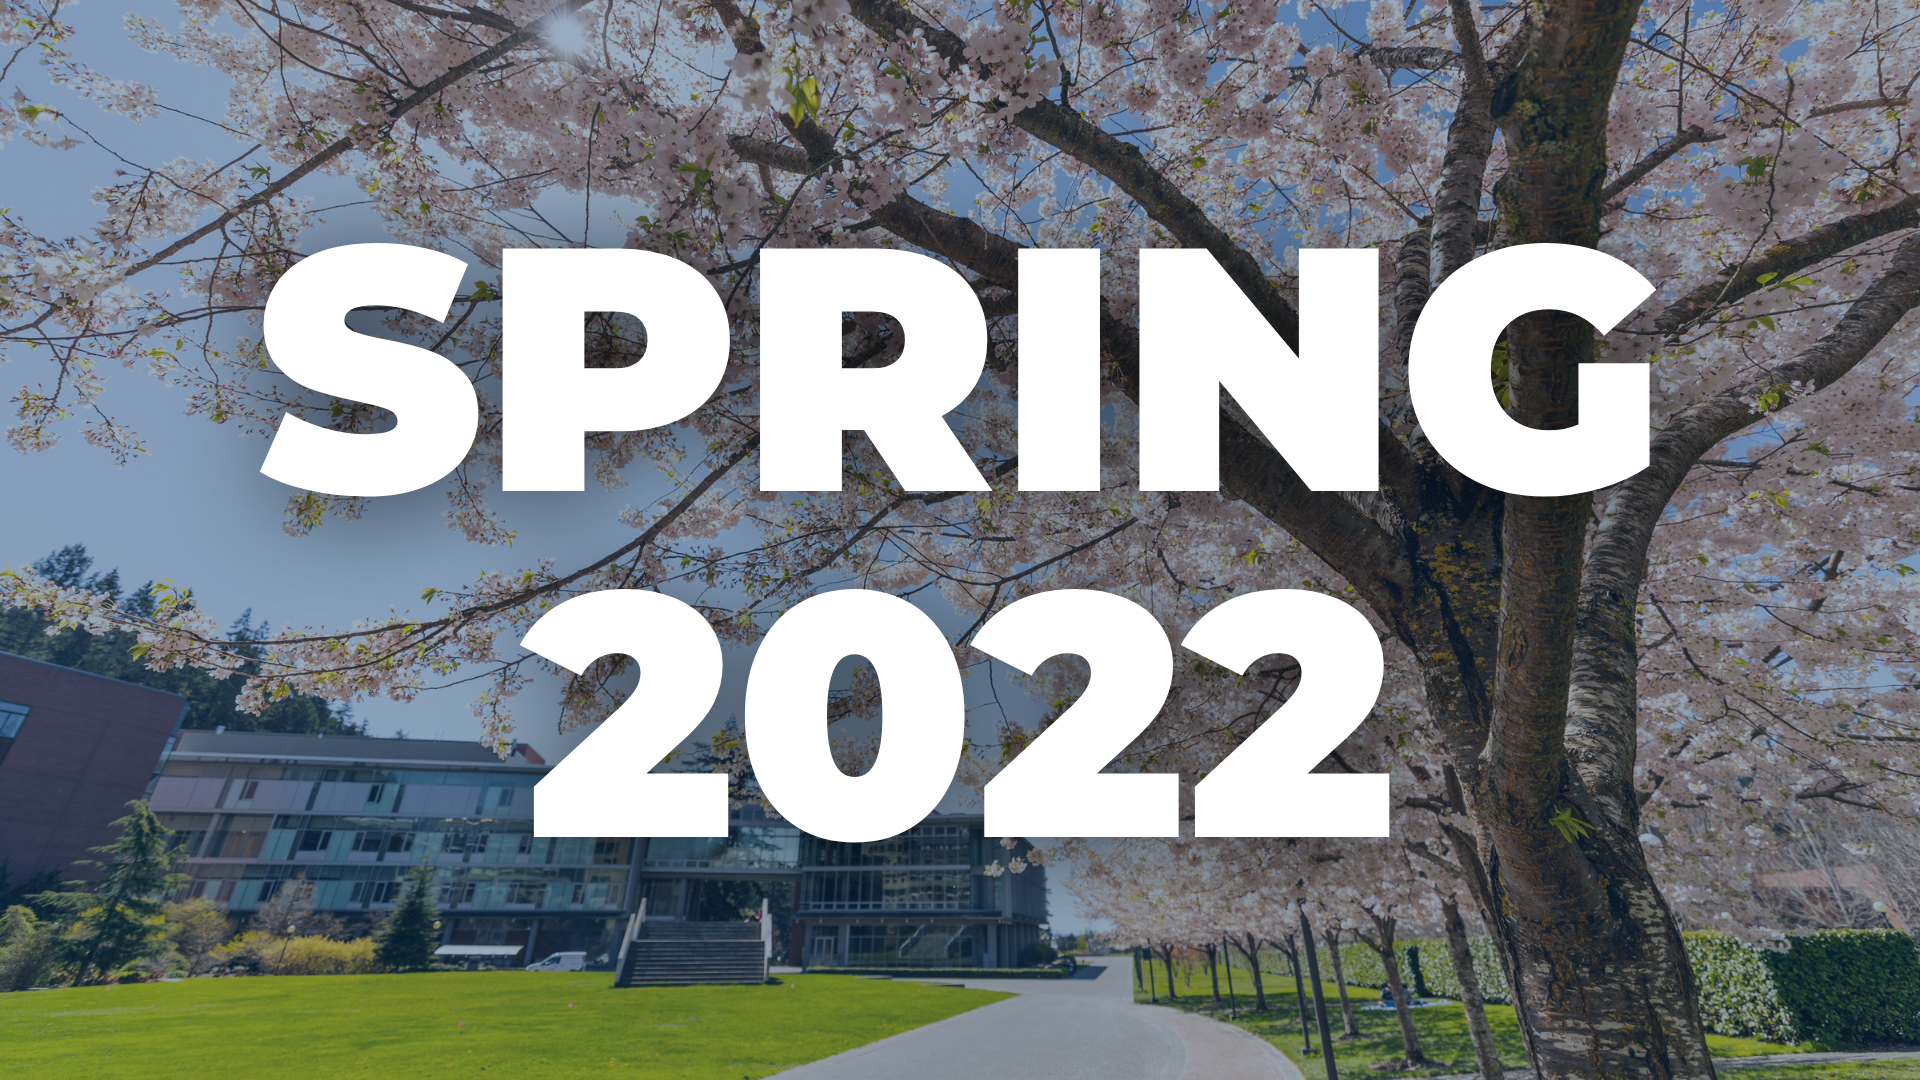 "Spring 2022" is printed over an image of south campus in the spring